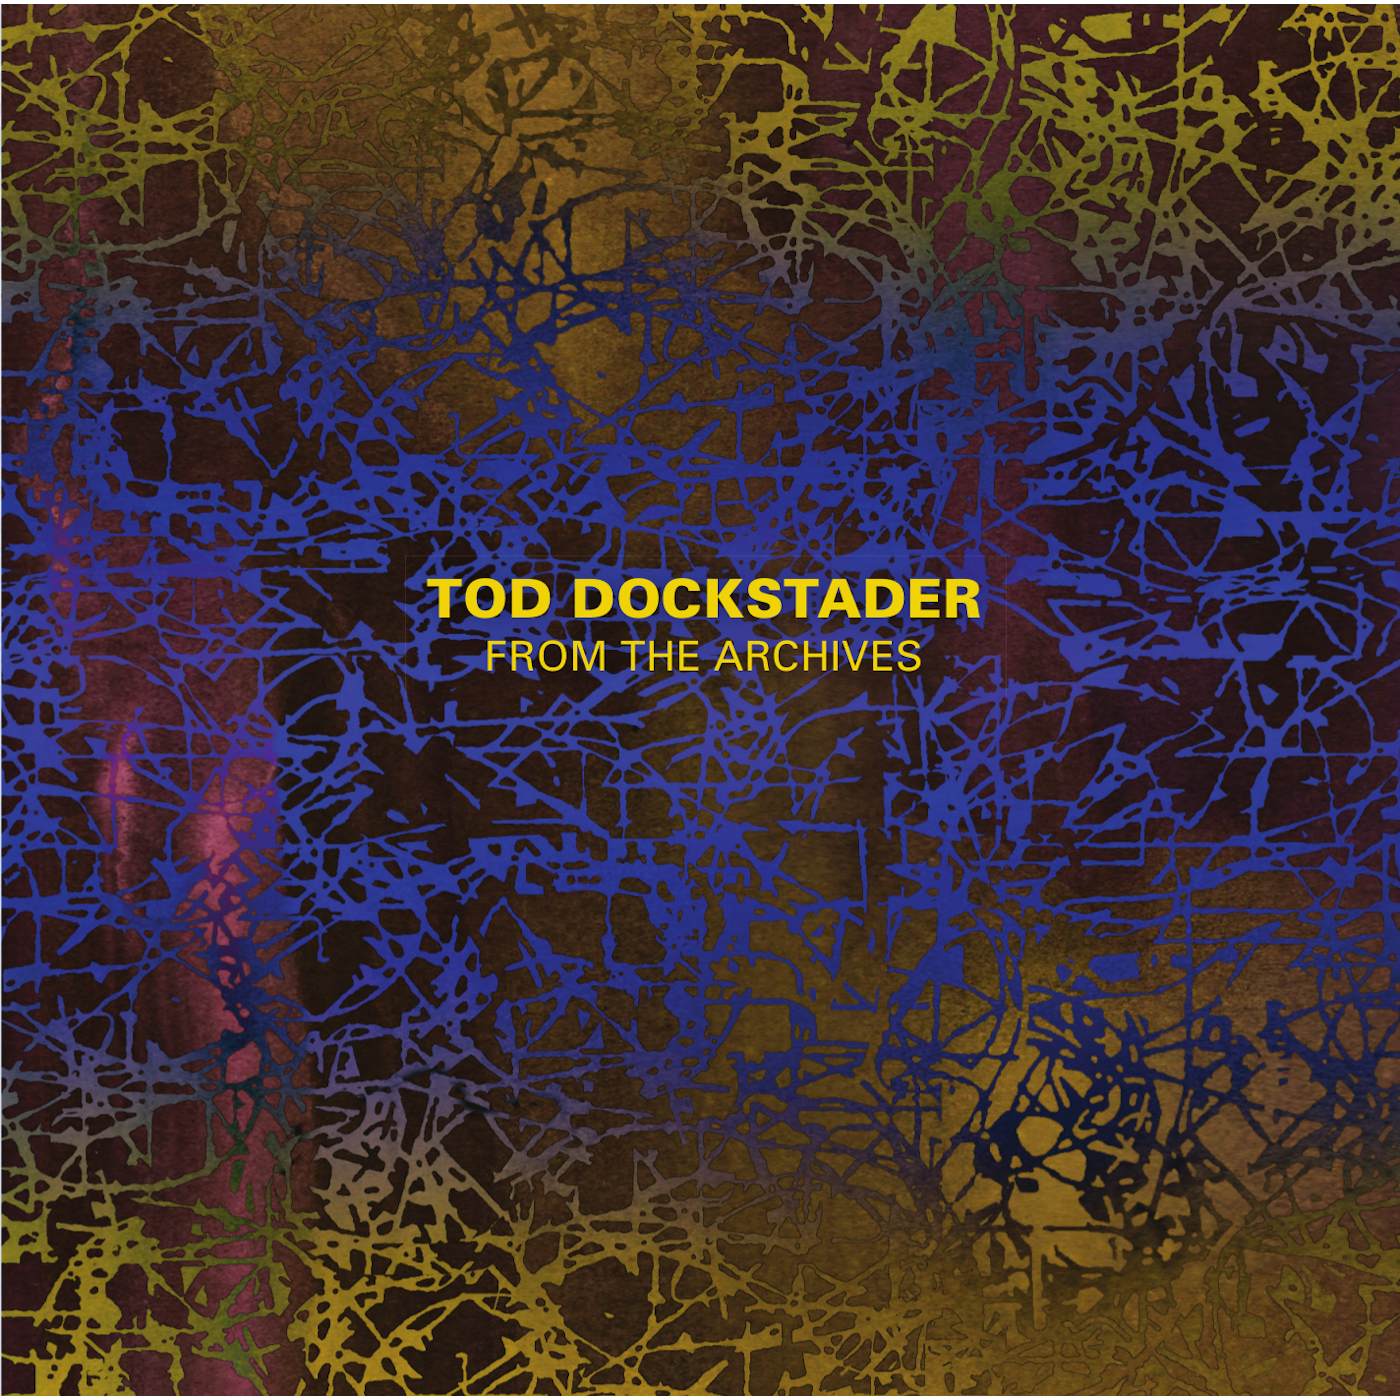 Tod Dockstader FROM THE ARCHIVES CD